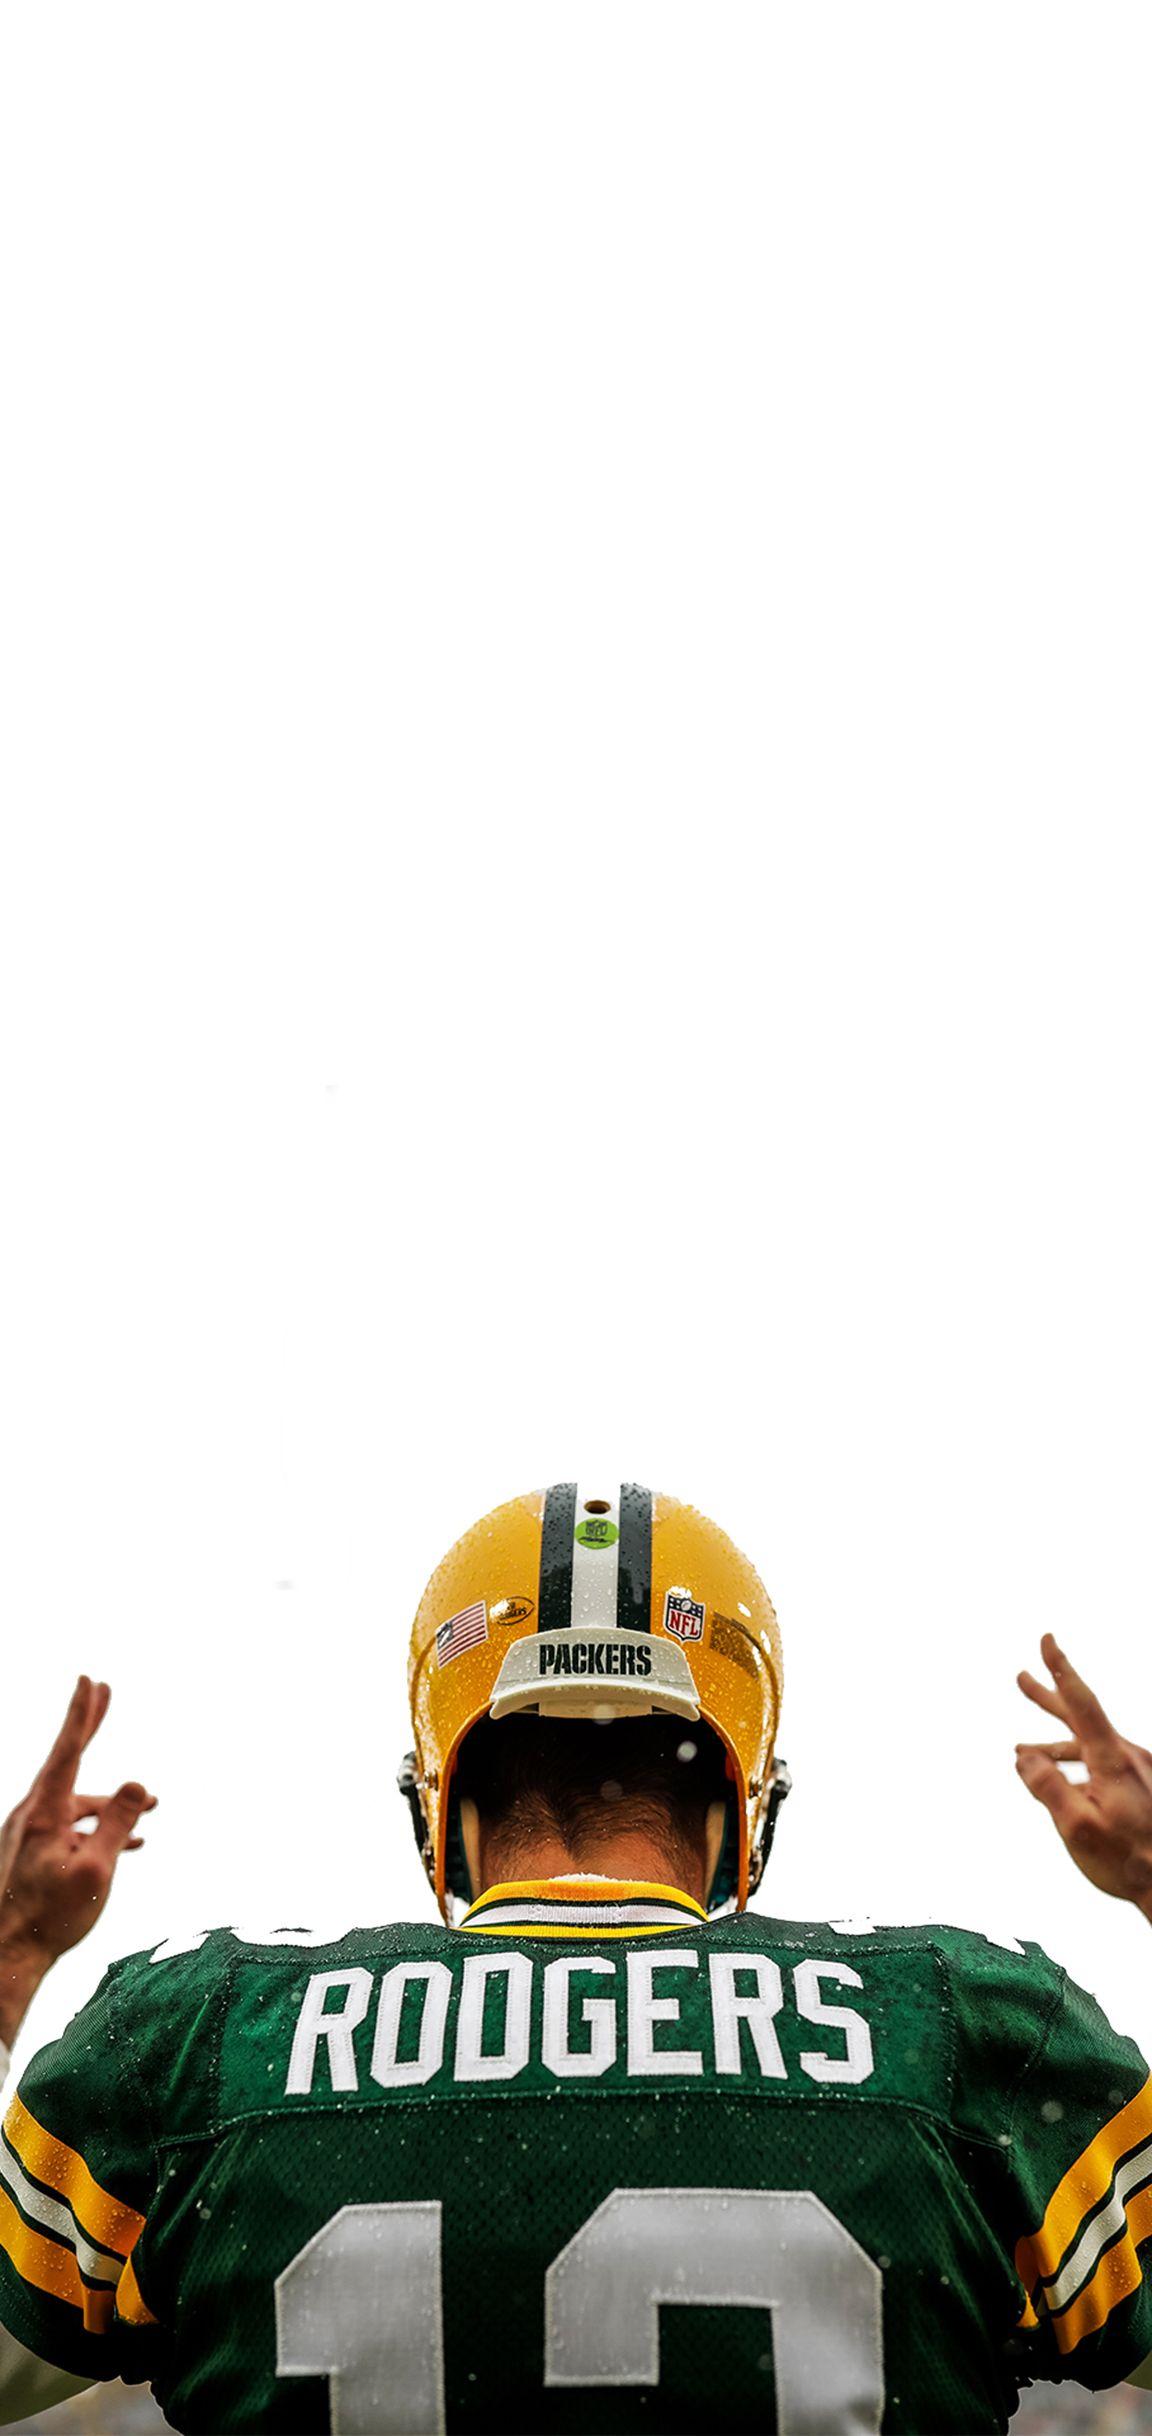 Green Bay Packers Logo on Wood Background  iPhone 4 wallpaper 960 pixels x  640 pixels Resolution NFL F  Green bay packers Green bay packers  wallpaper Green bay